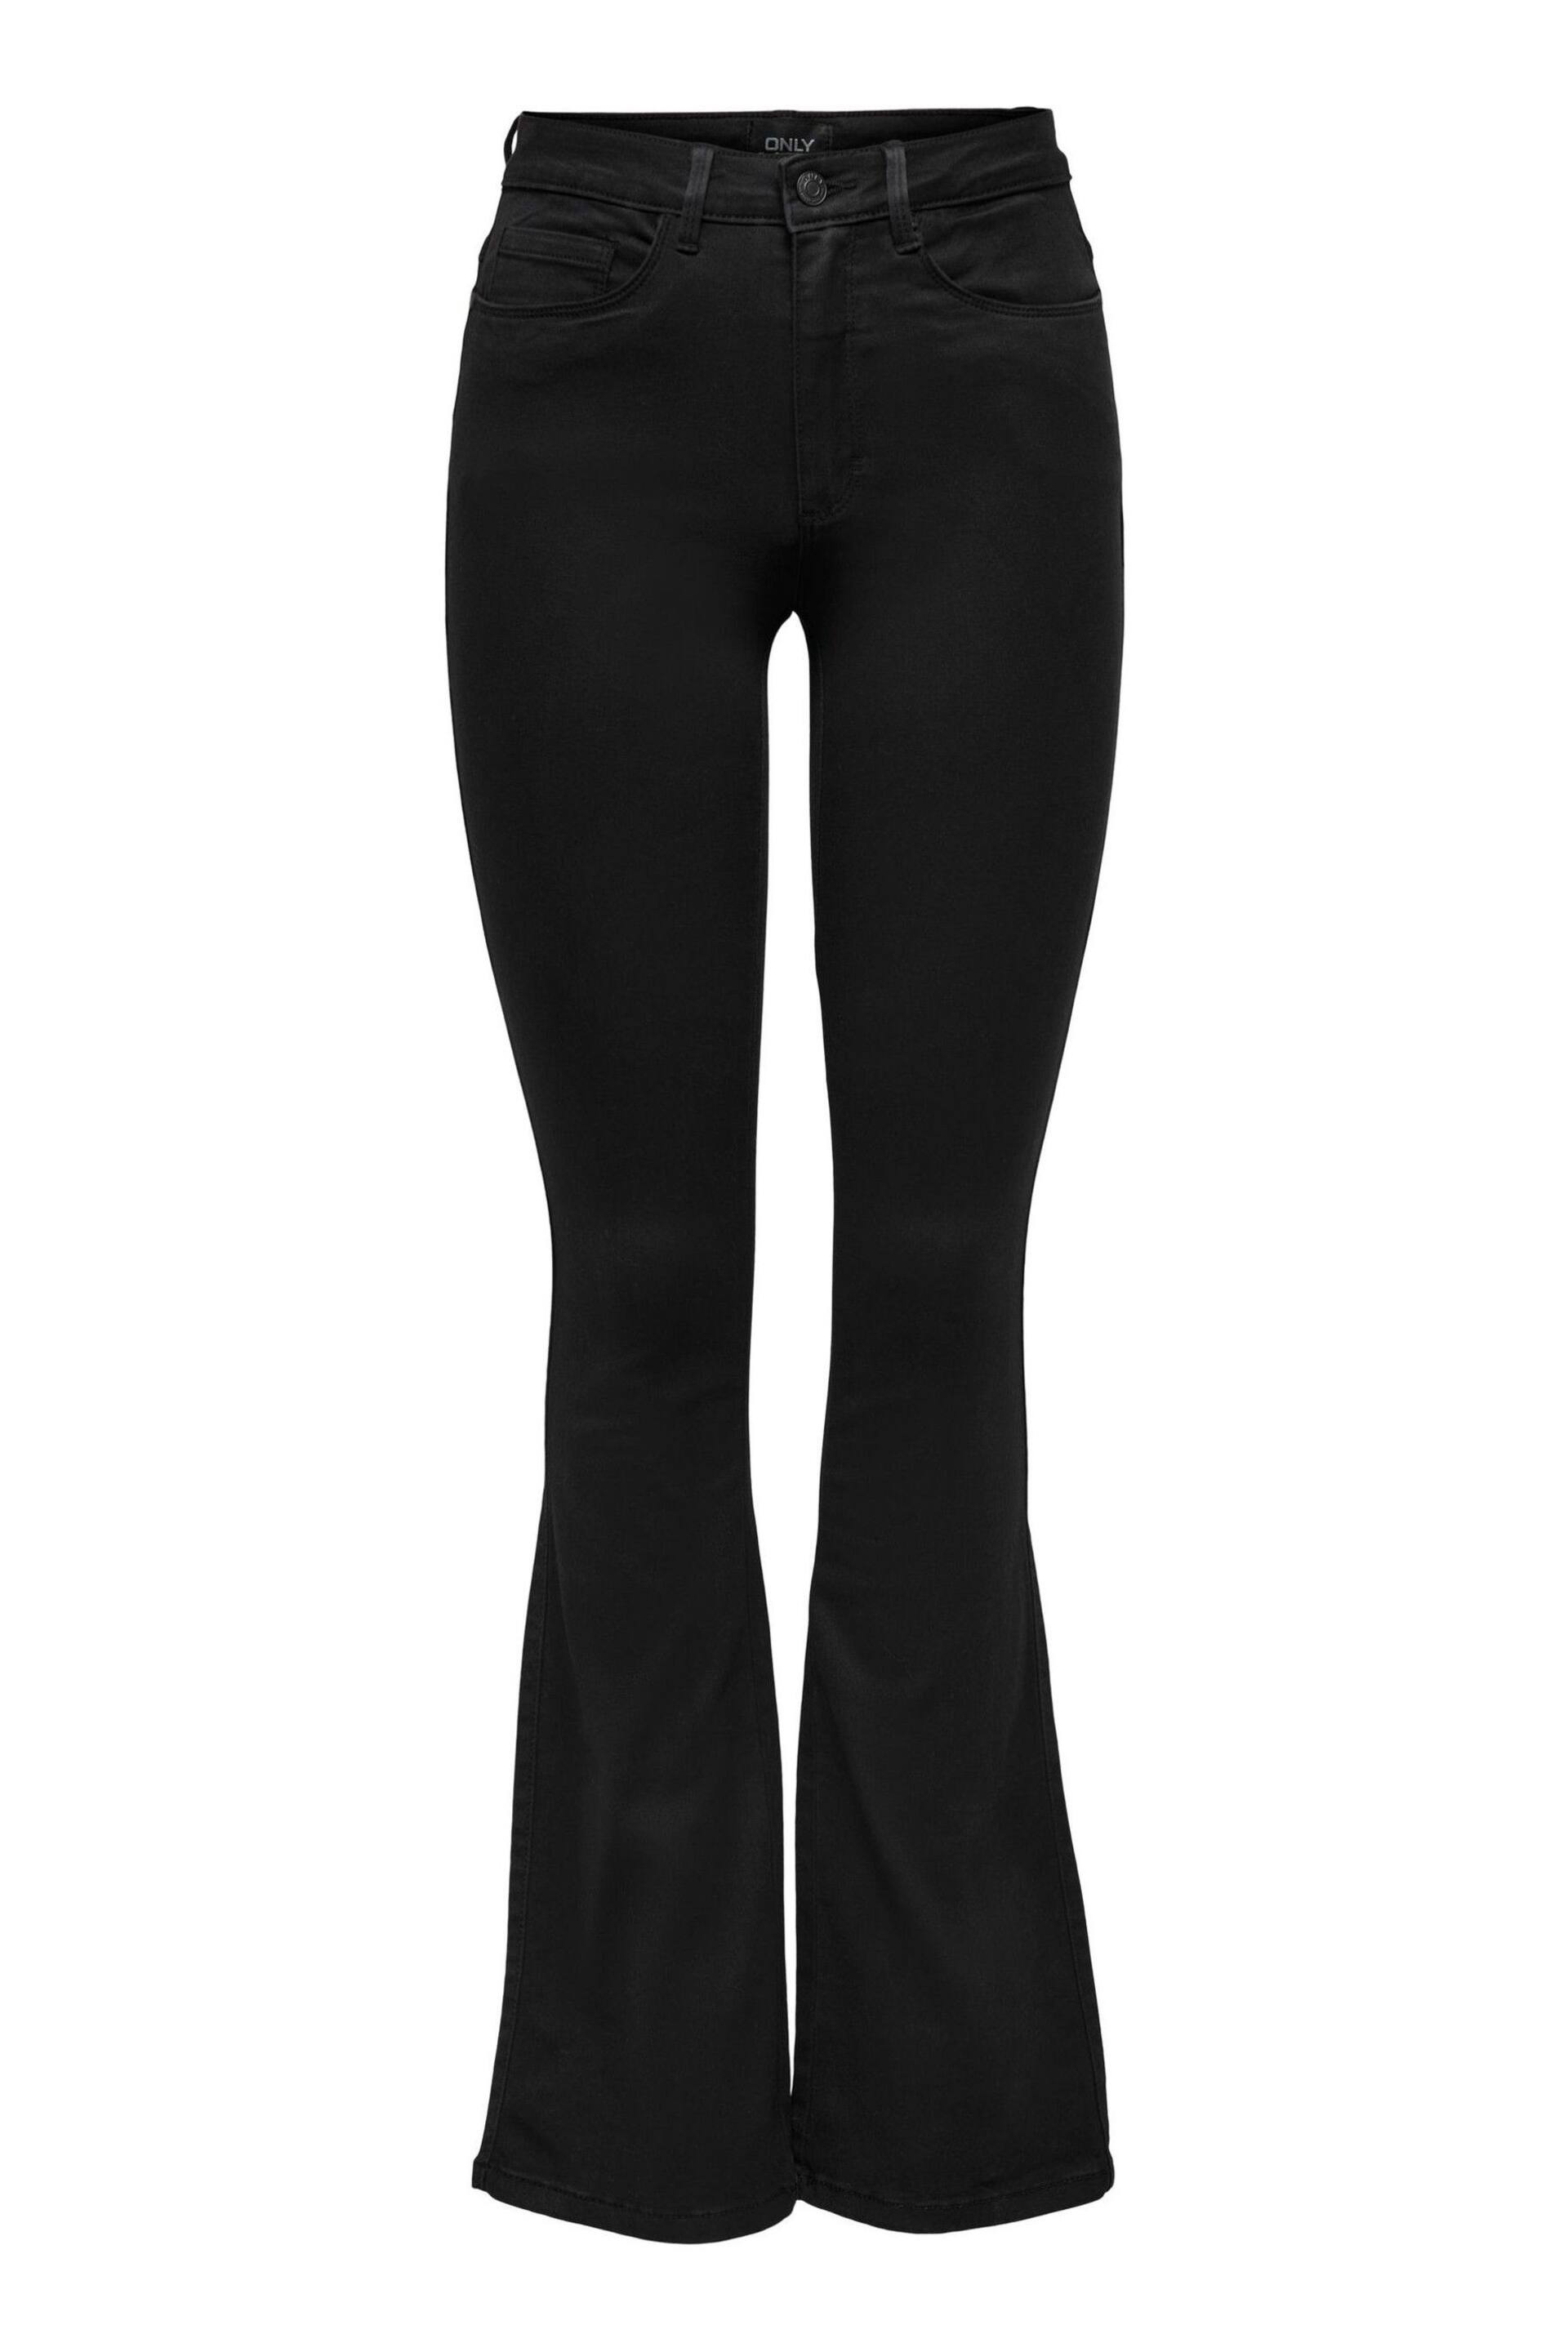 ONLY Black High Waisted Stretch Flare Royal Jeans - Image 6 of 6